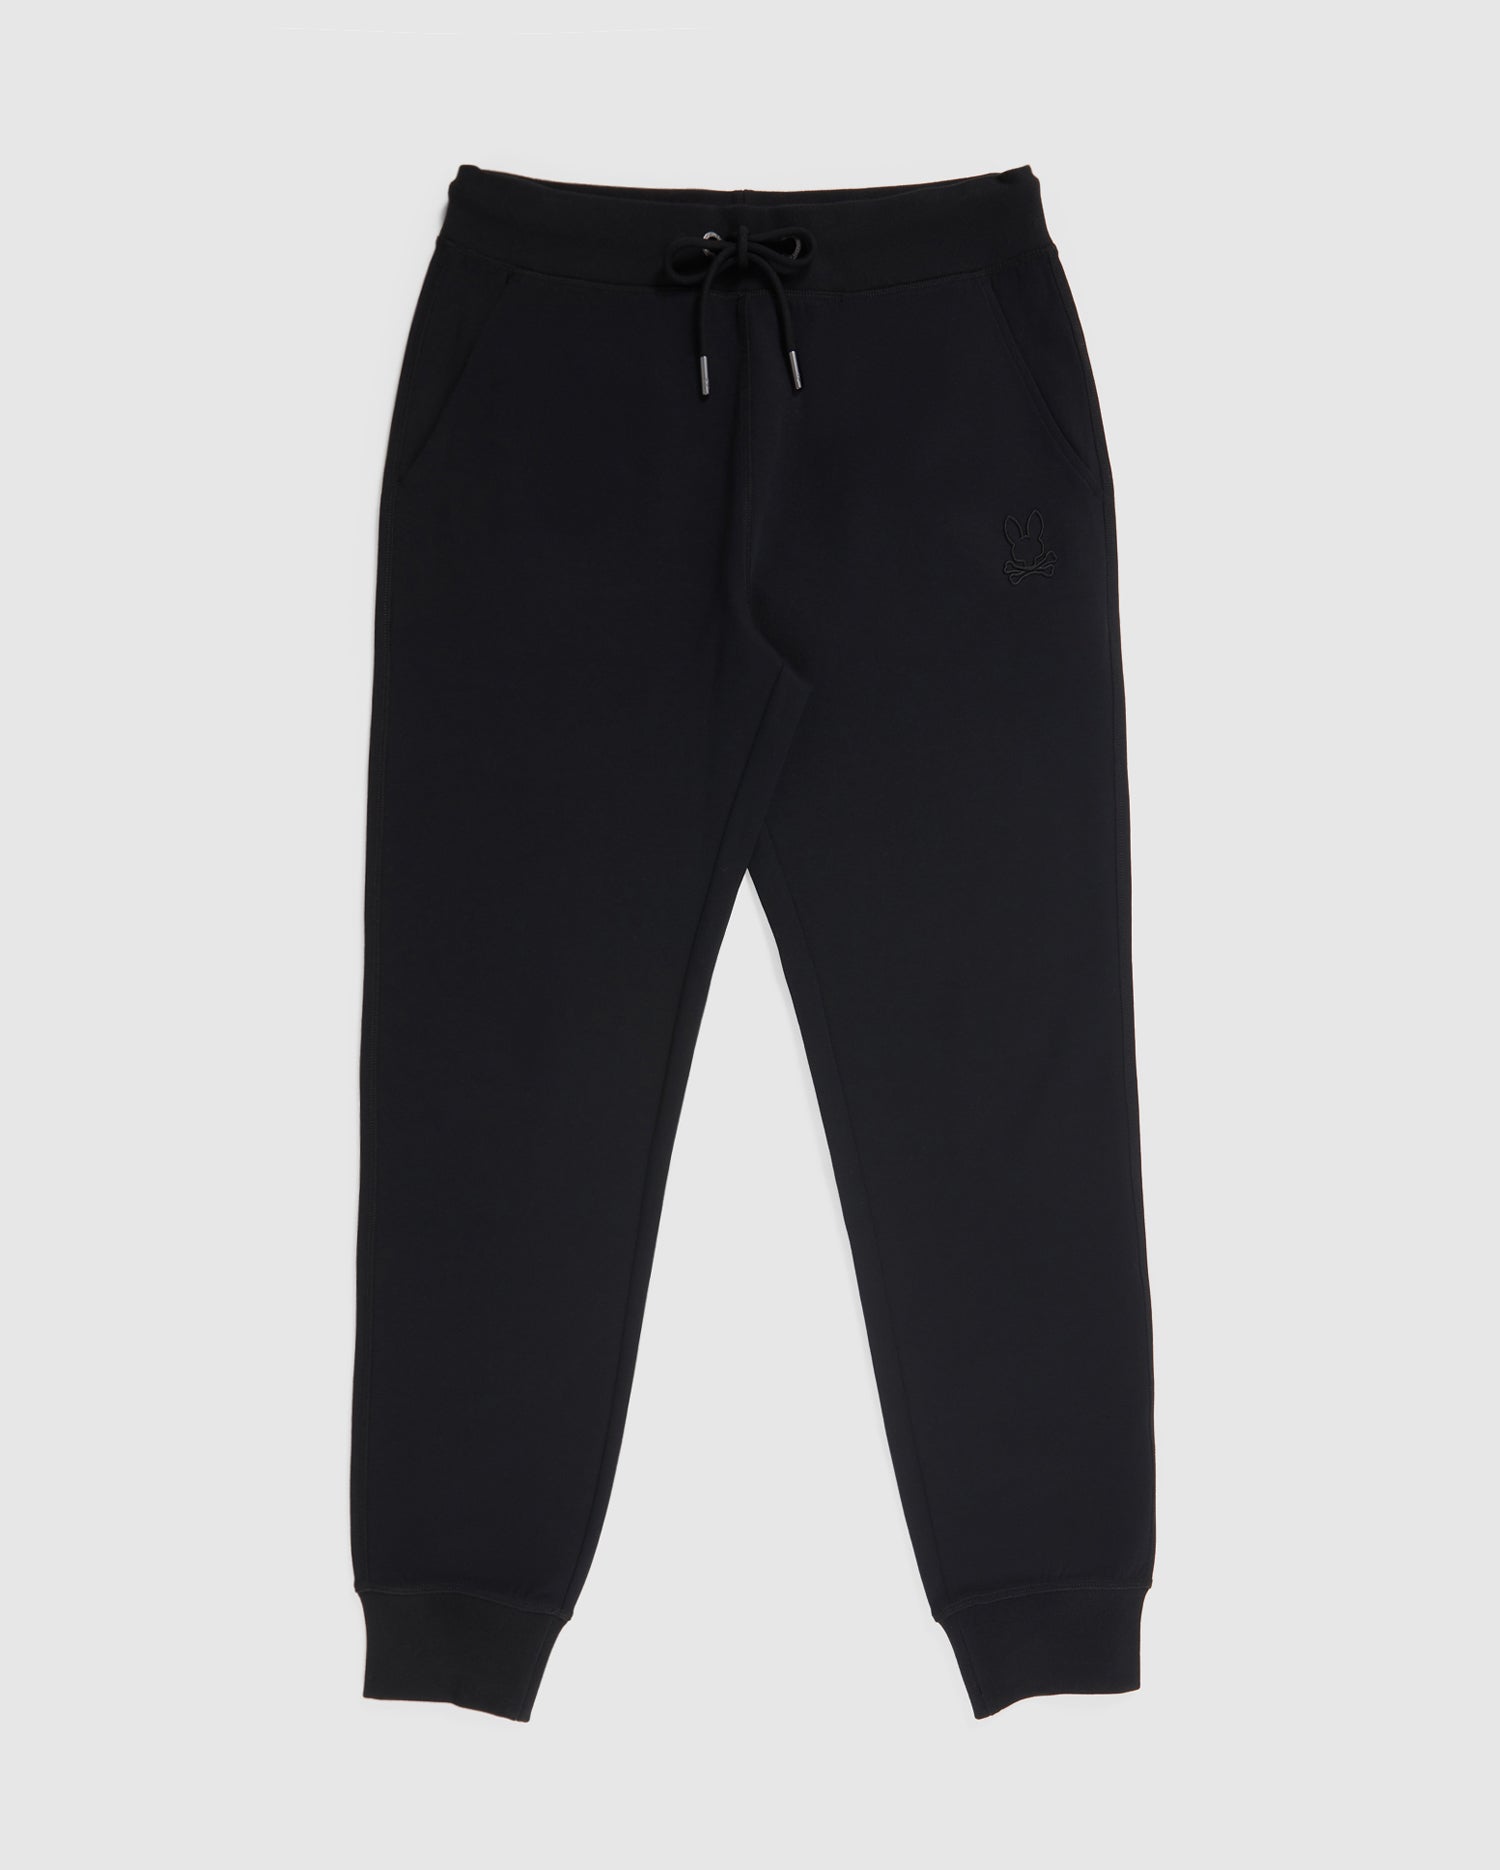 These Comfy Joggers Are Up to 29% Off